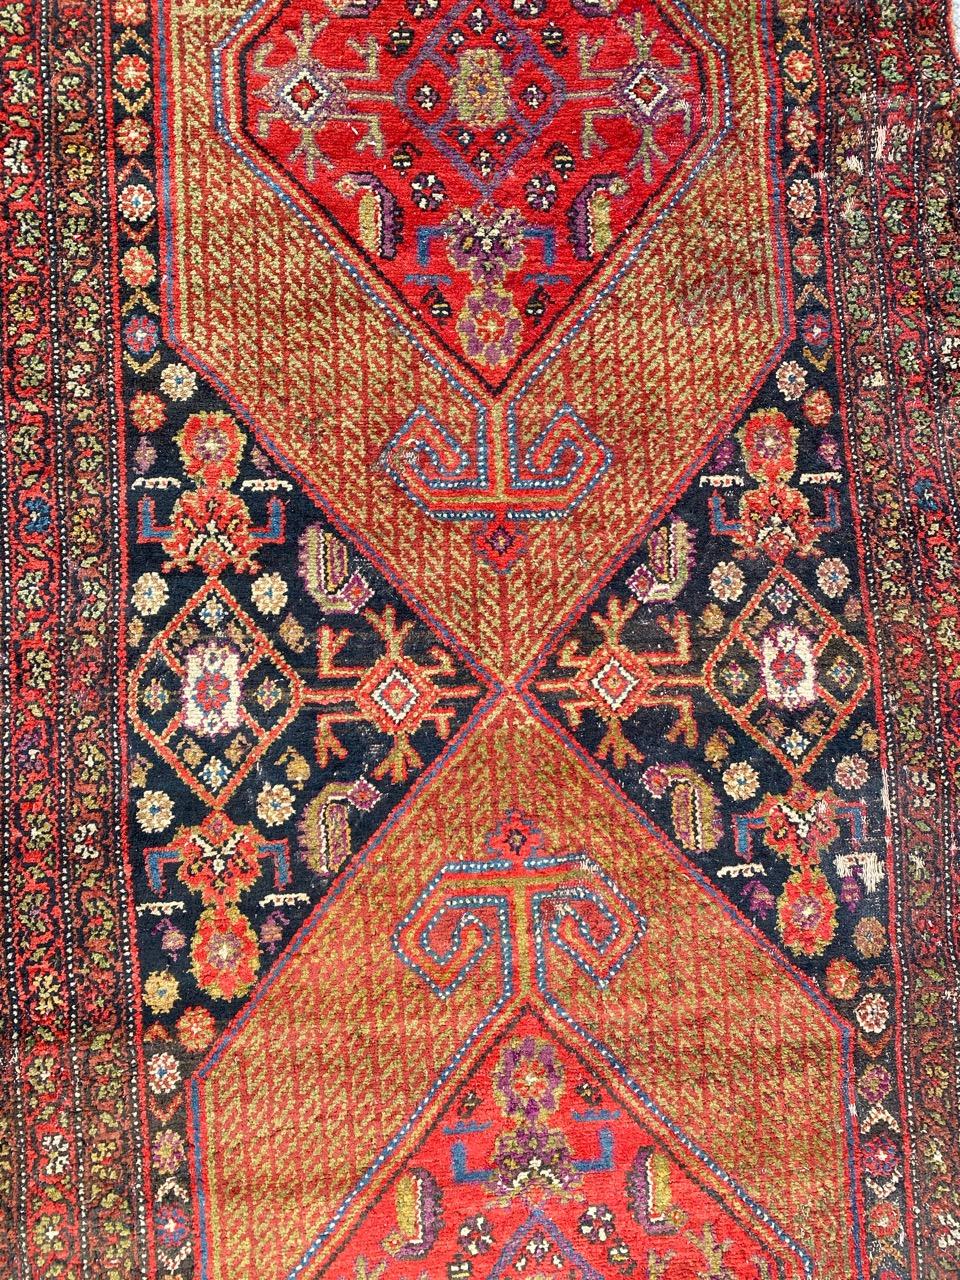 Nice 19th century Malayer runner with beautiful geometrical design and beautiful natural colors, entirely hand knotted with wool velvet on cotton foundation.